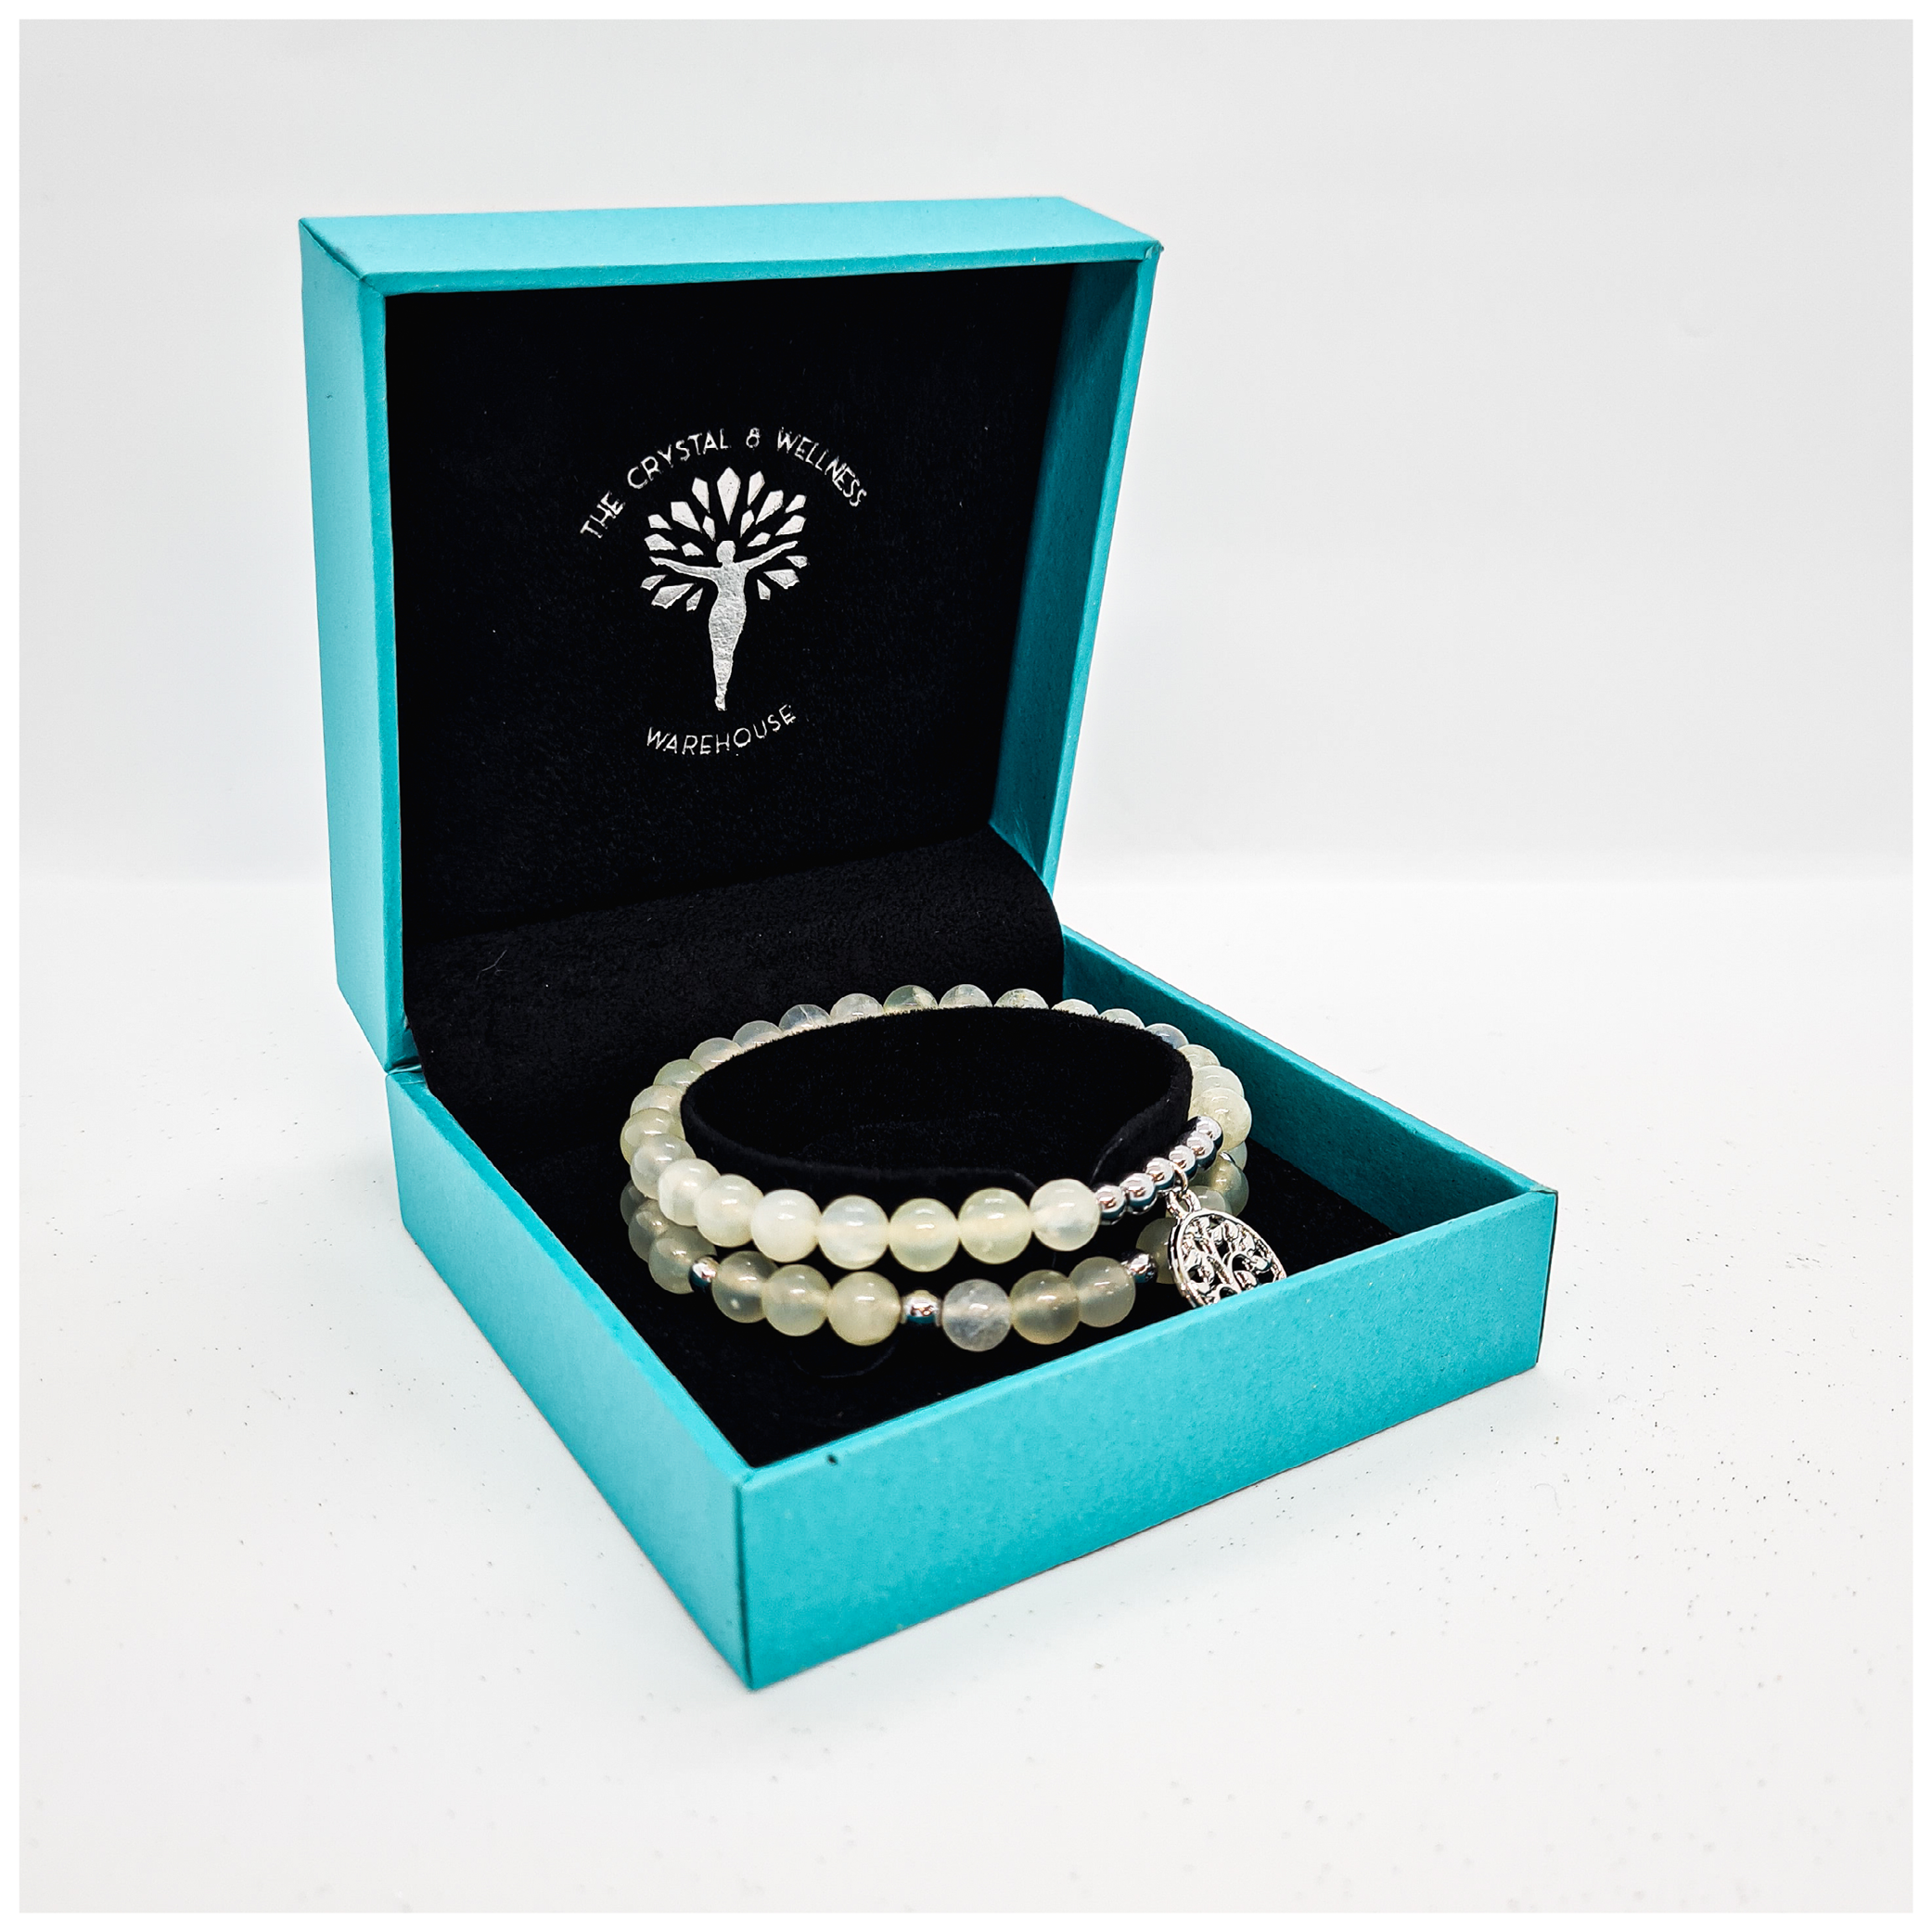 New Jade 8mm crystal bead bracelet with silver tree of life charm